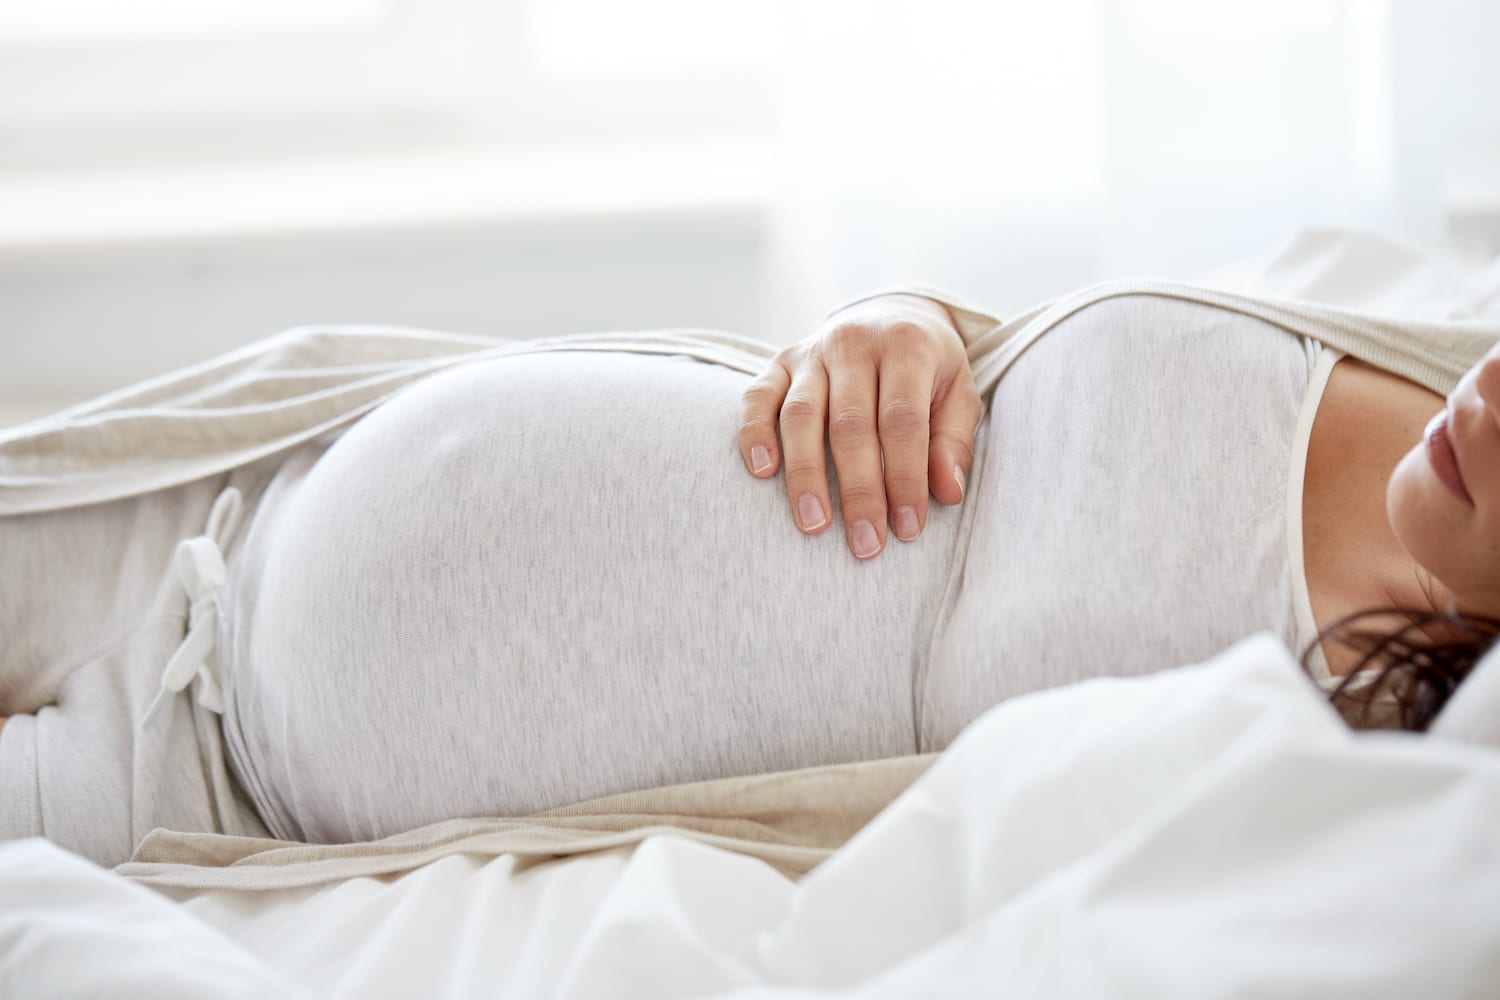 10 Tips on Surviving the First Trimester - Sleeping Should Be Easy